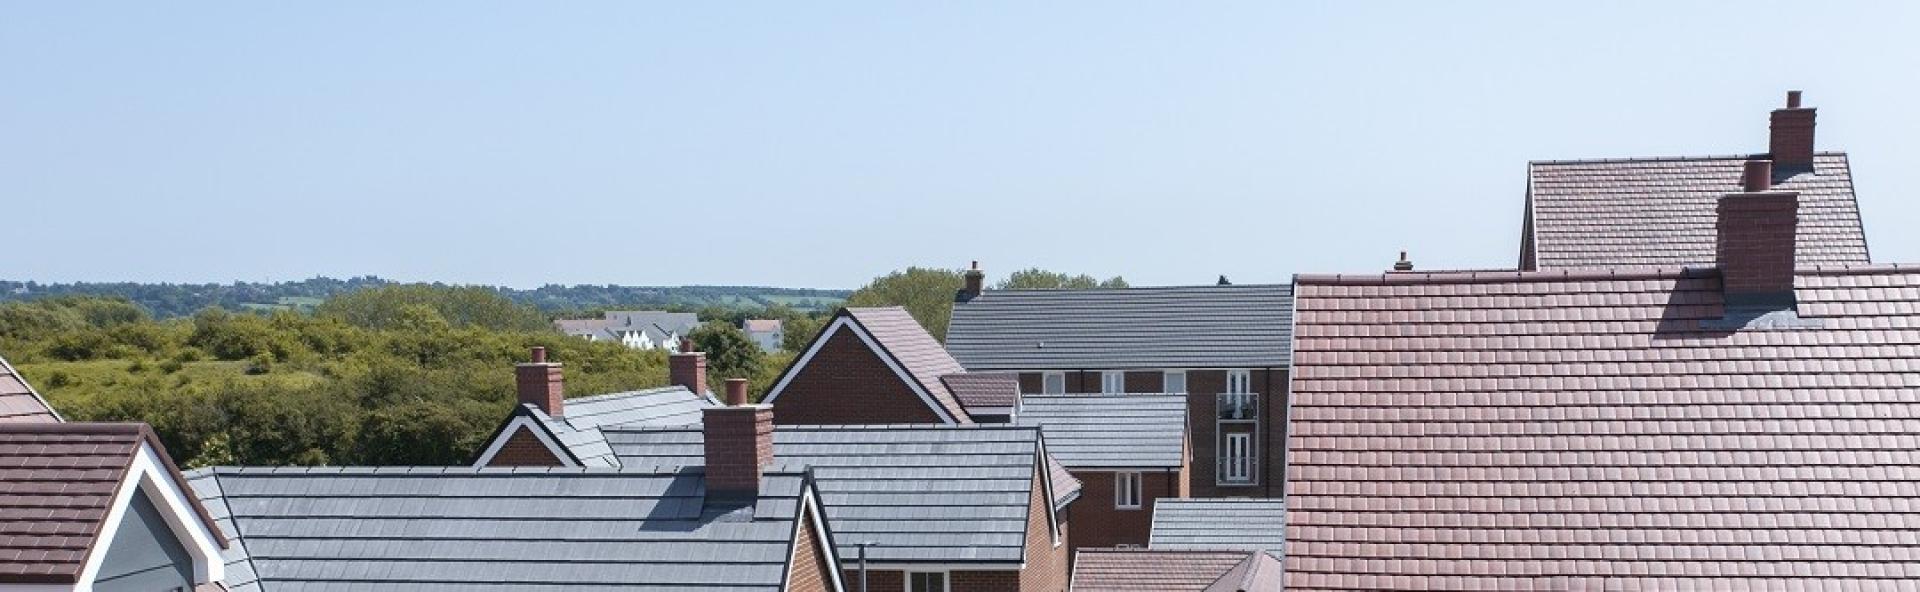 Roofers in Sheffield, Rotherham, Dronfield &amp; Chesterfield - Local Roofing Specialists